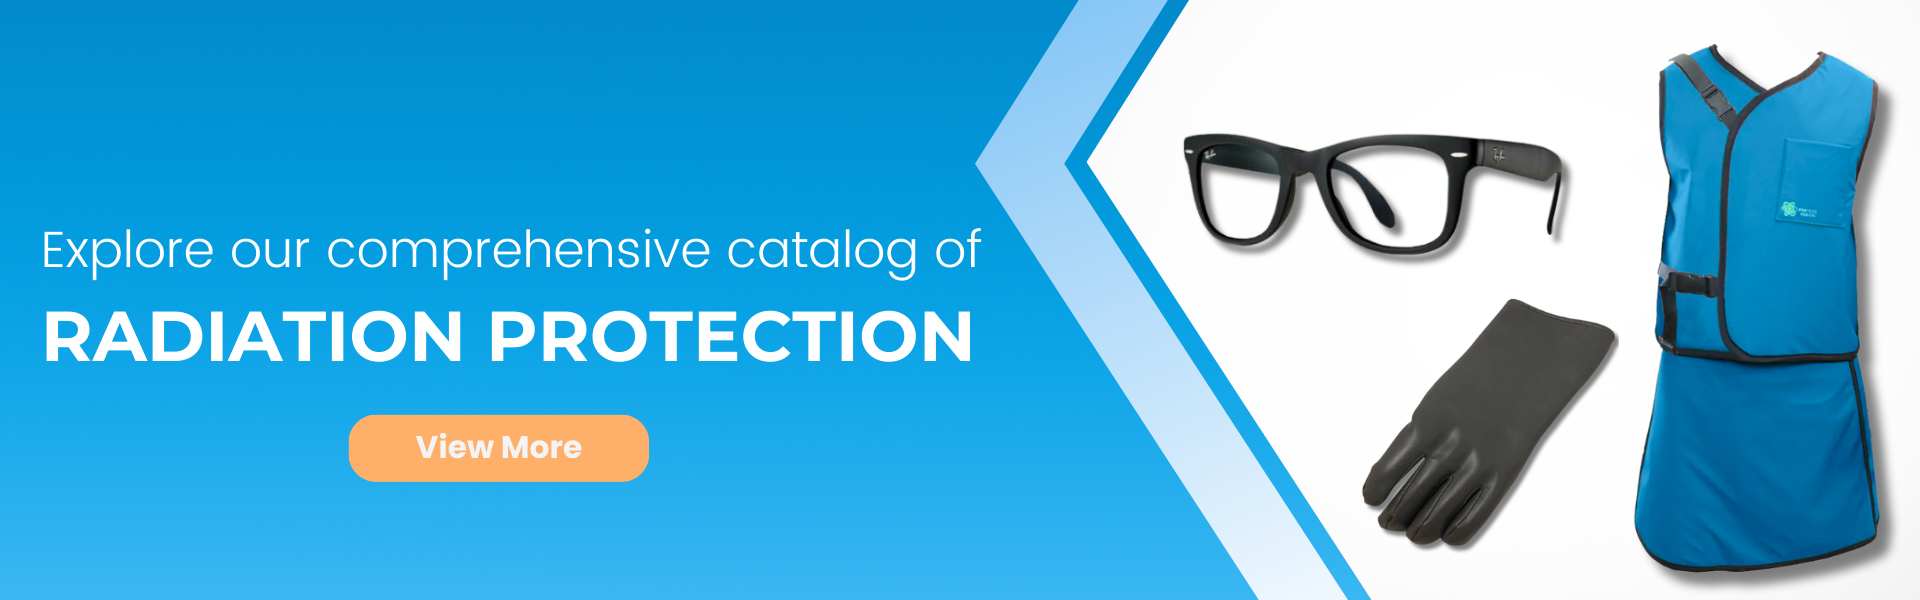 Explore our comprehensive catalog of radiation protection